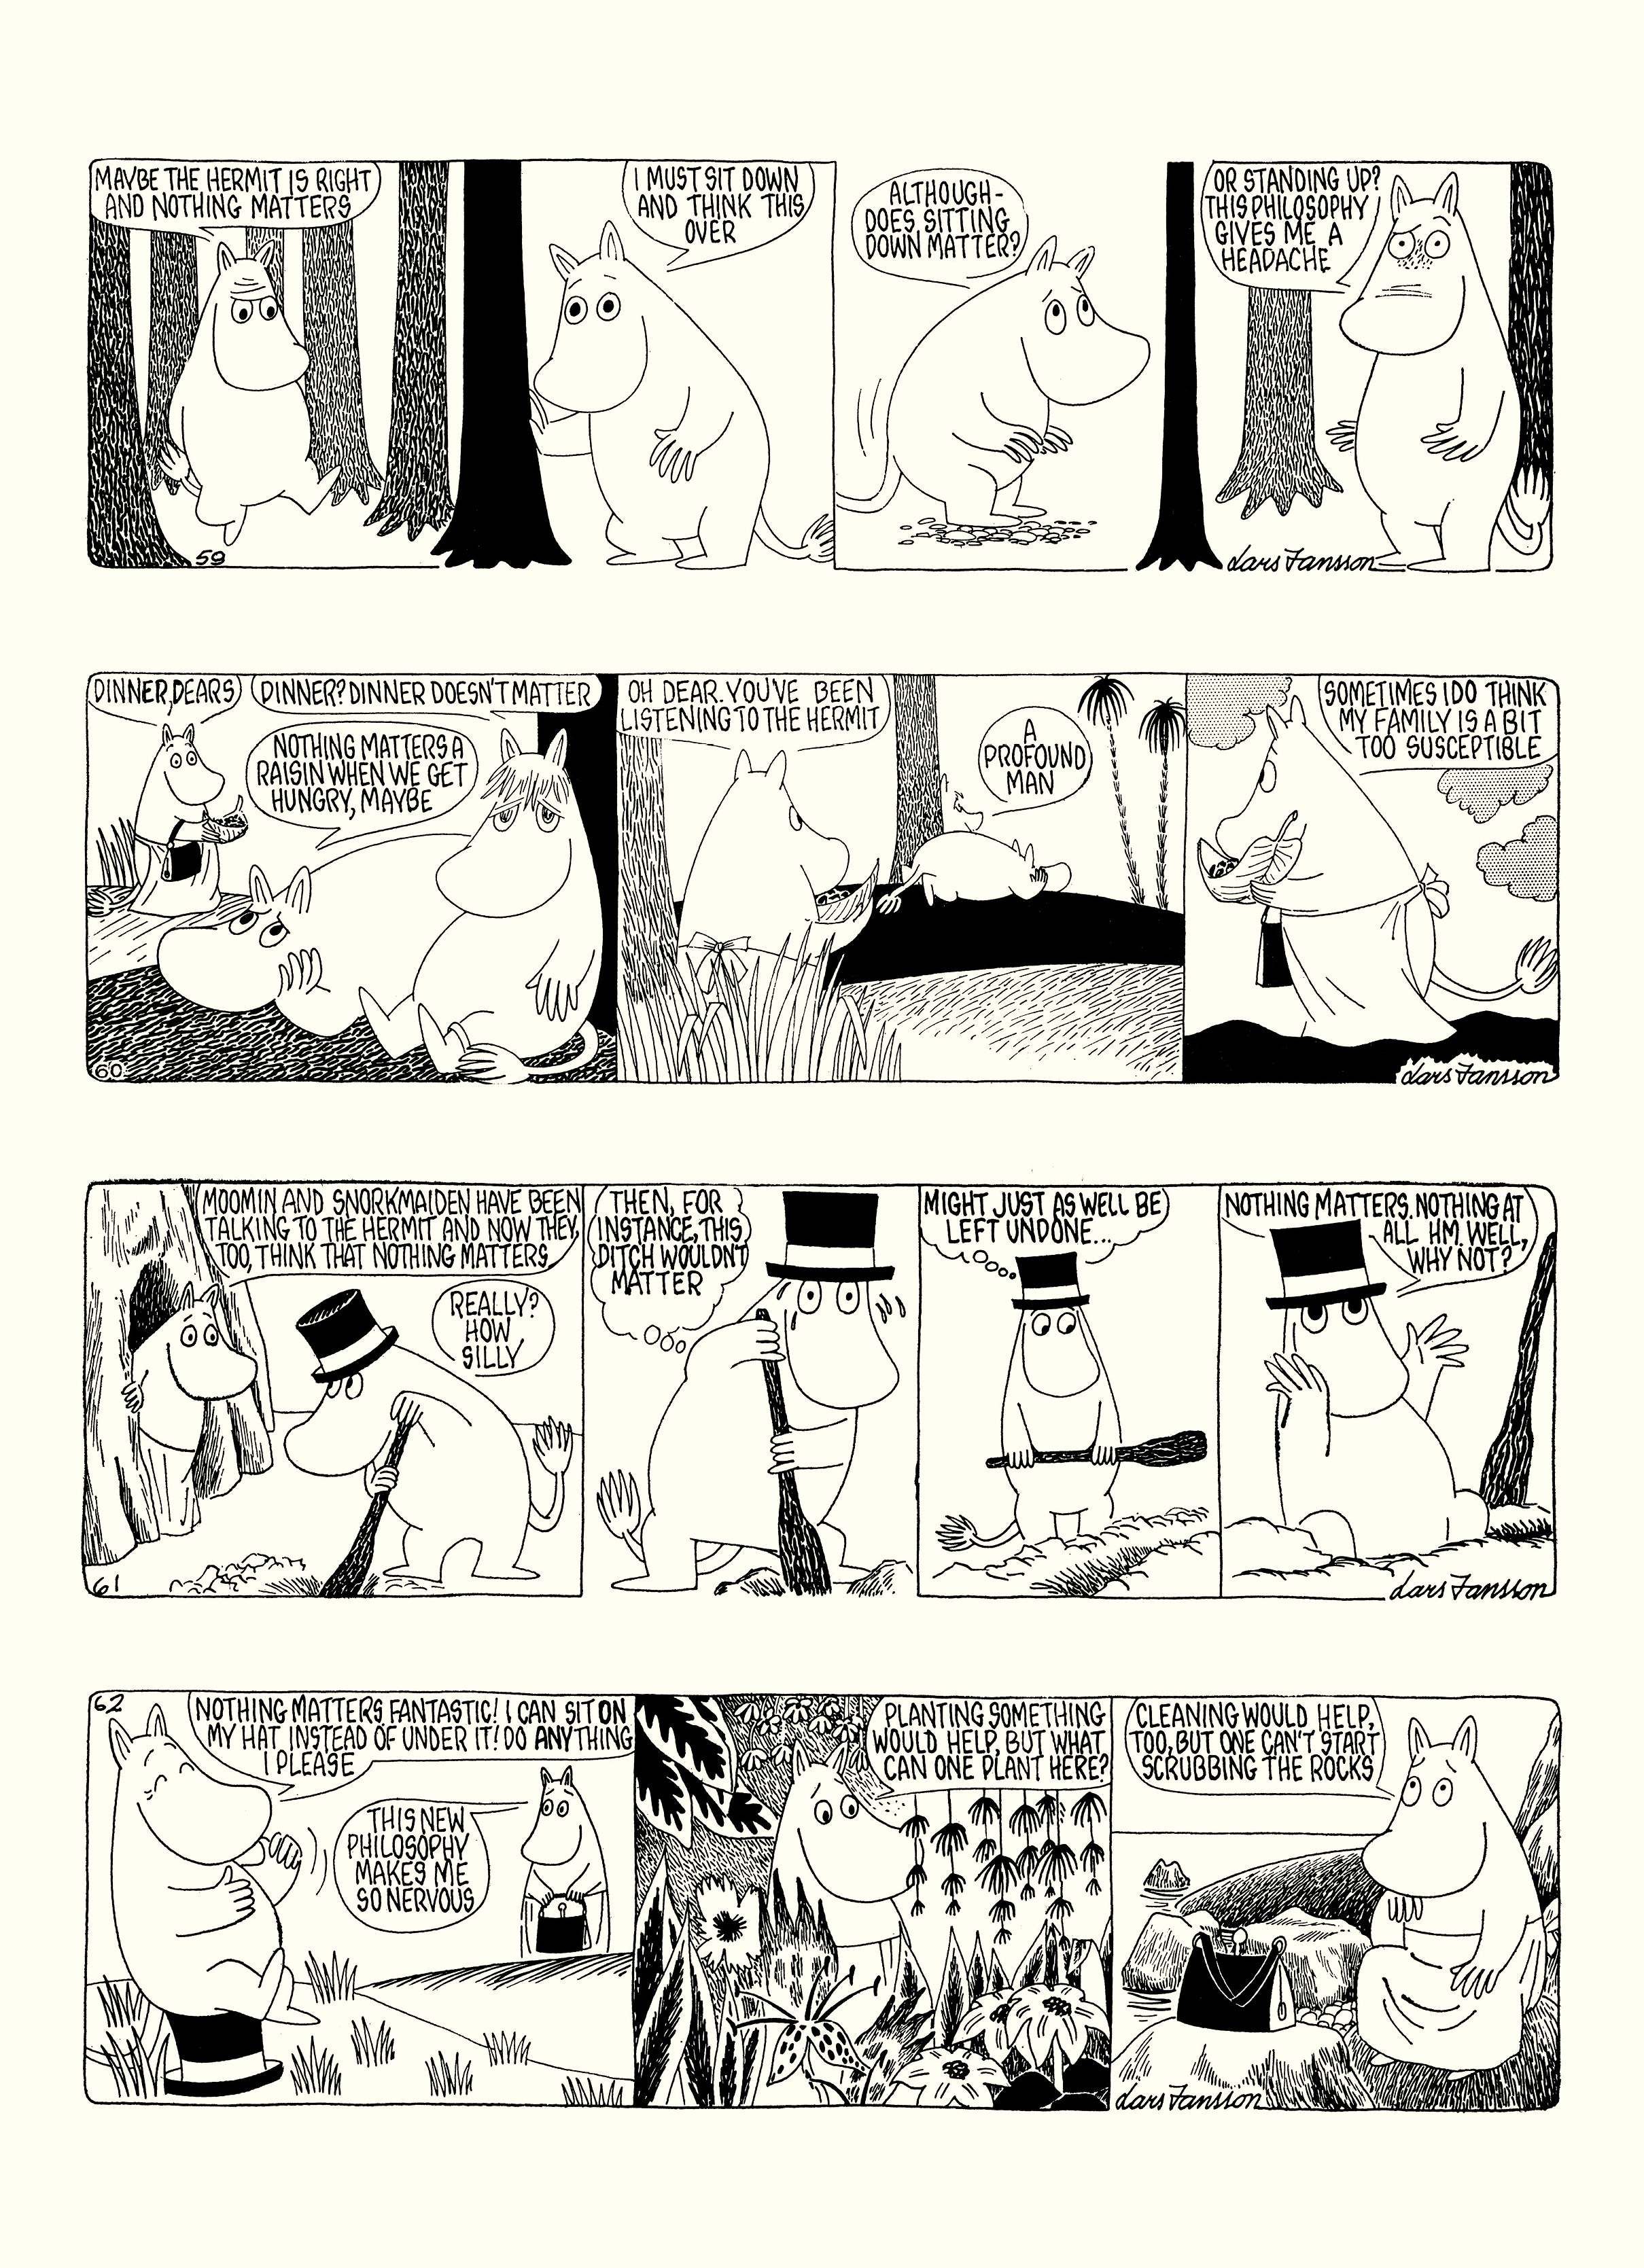 Read online Moomin: The Complete Lars Jansson Comic Strip comic -  Issue # TPB 8 - 20